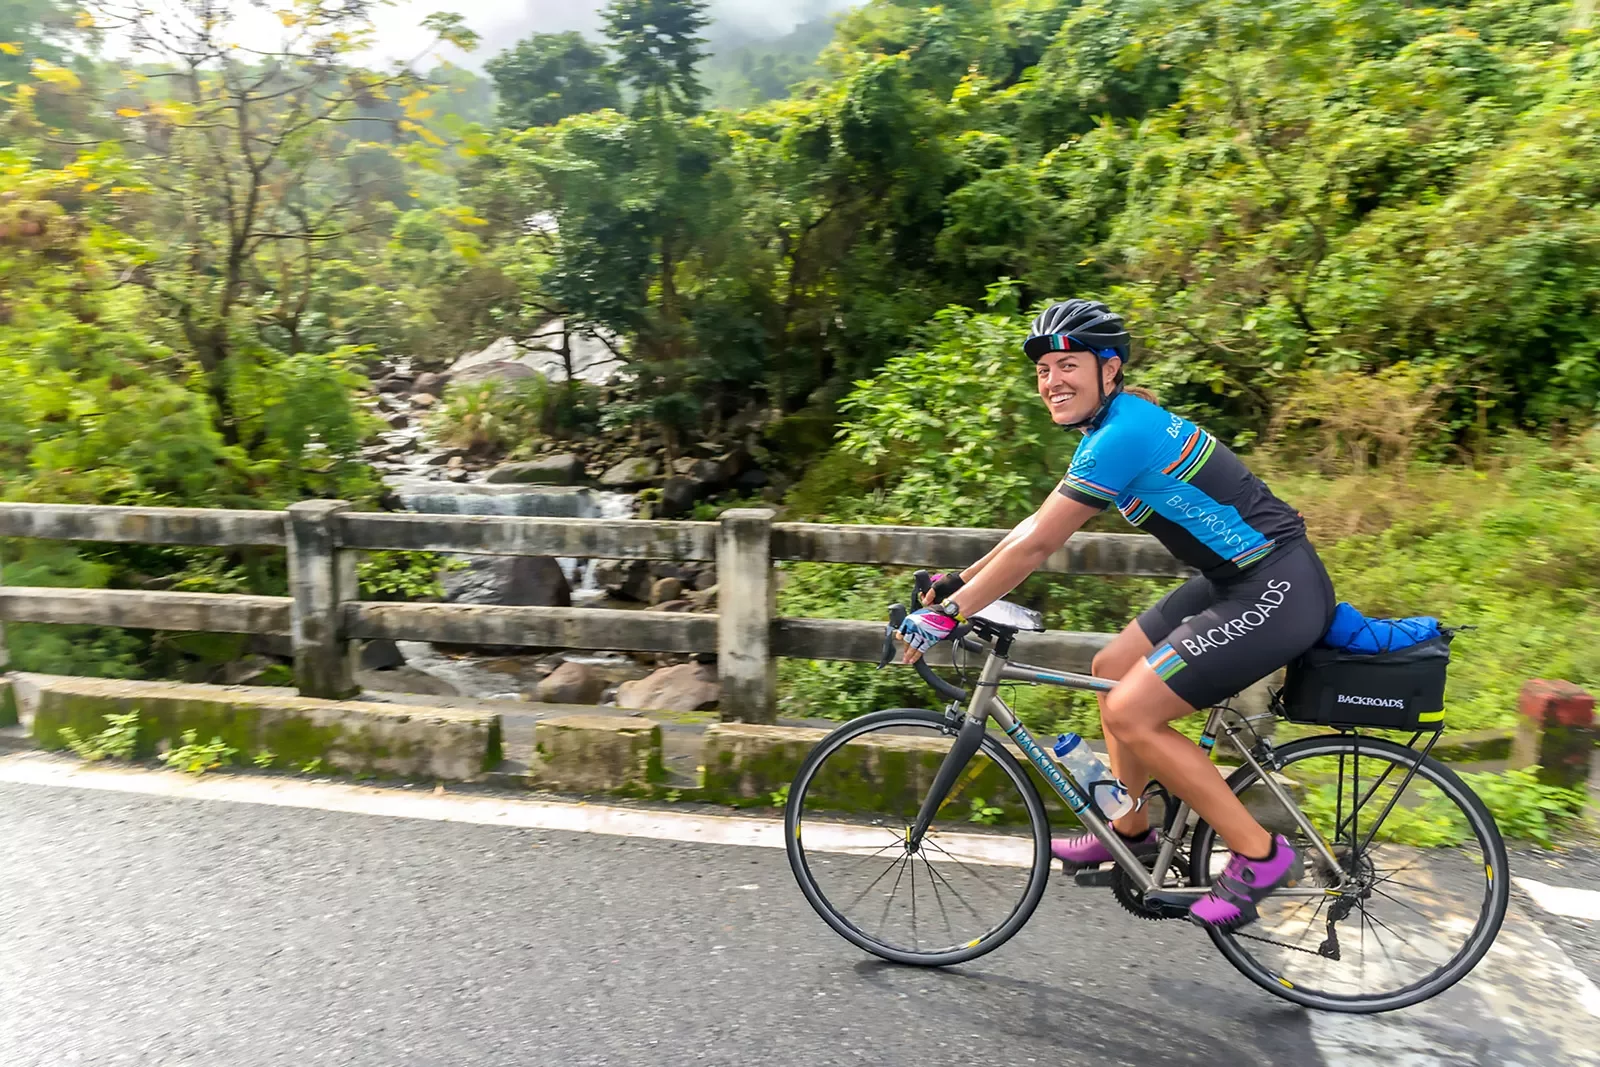 Woman riding along a road in Vietnam